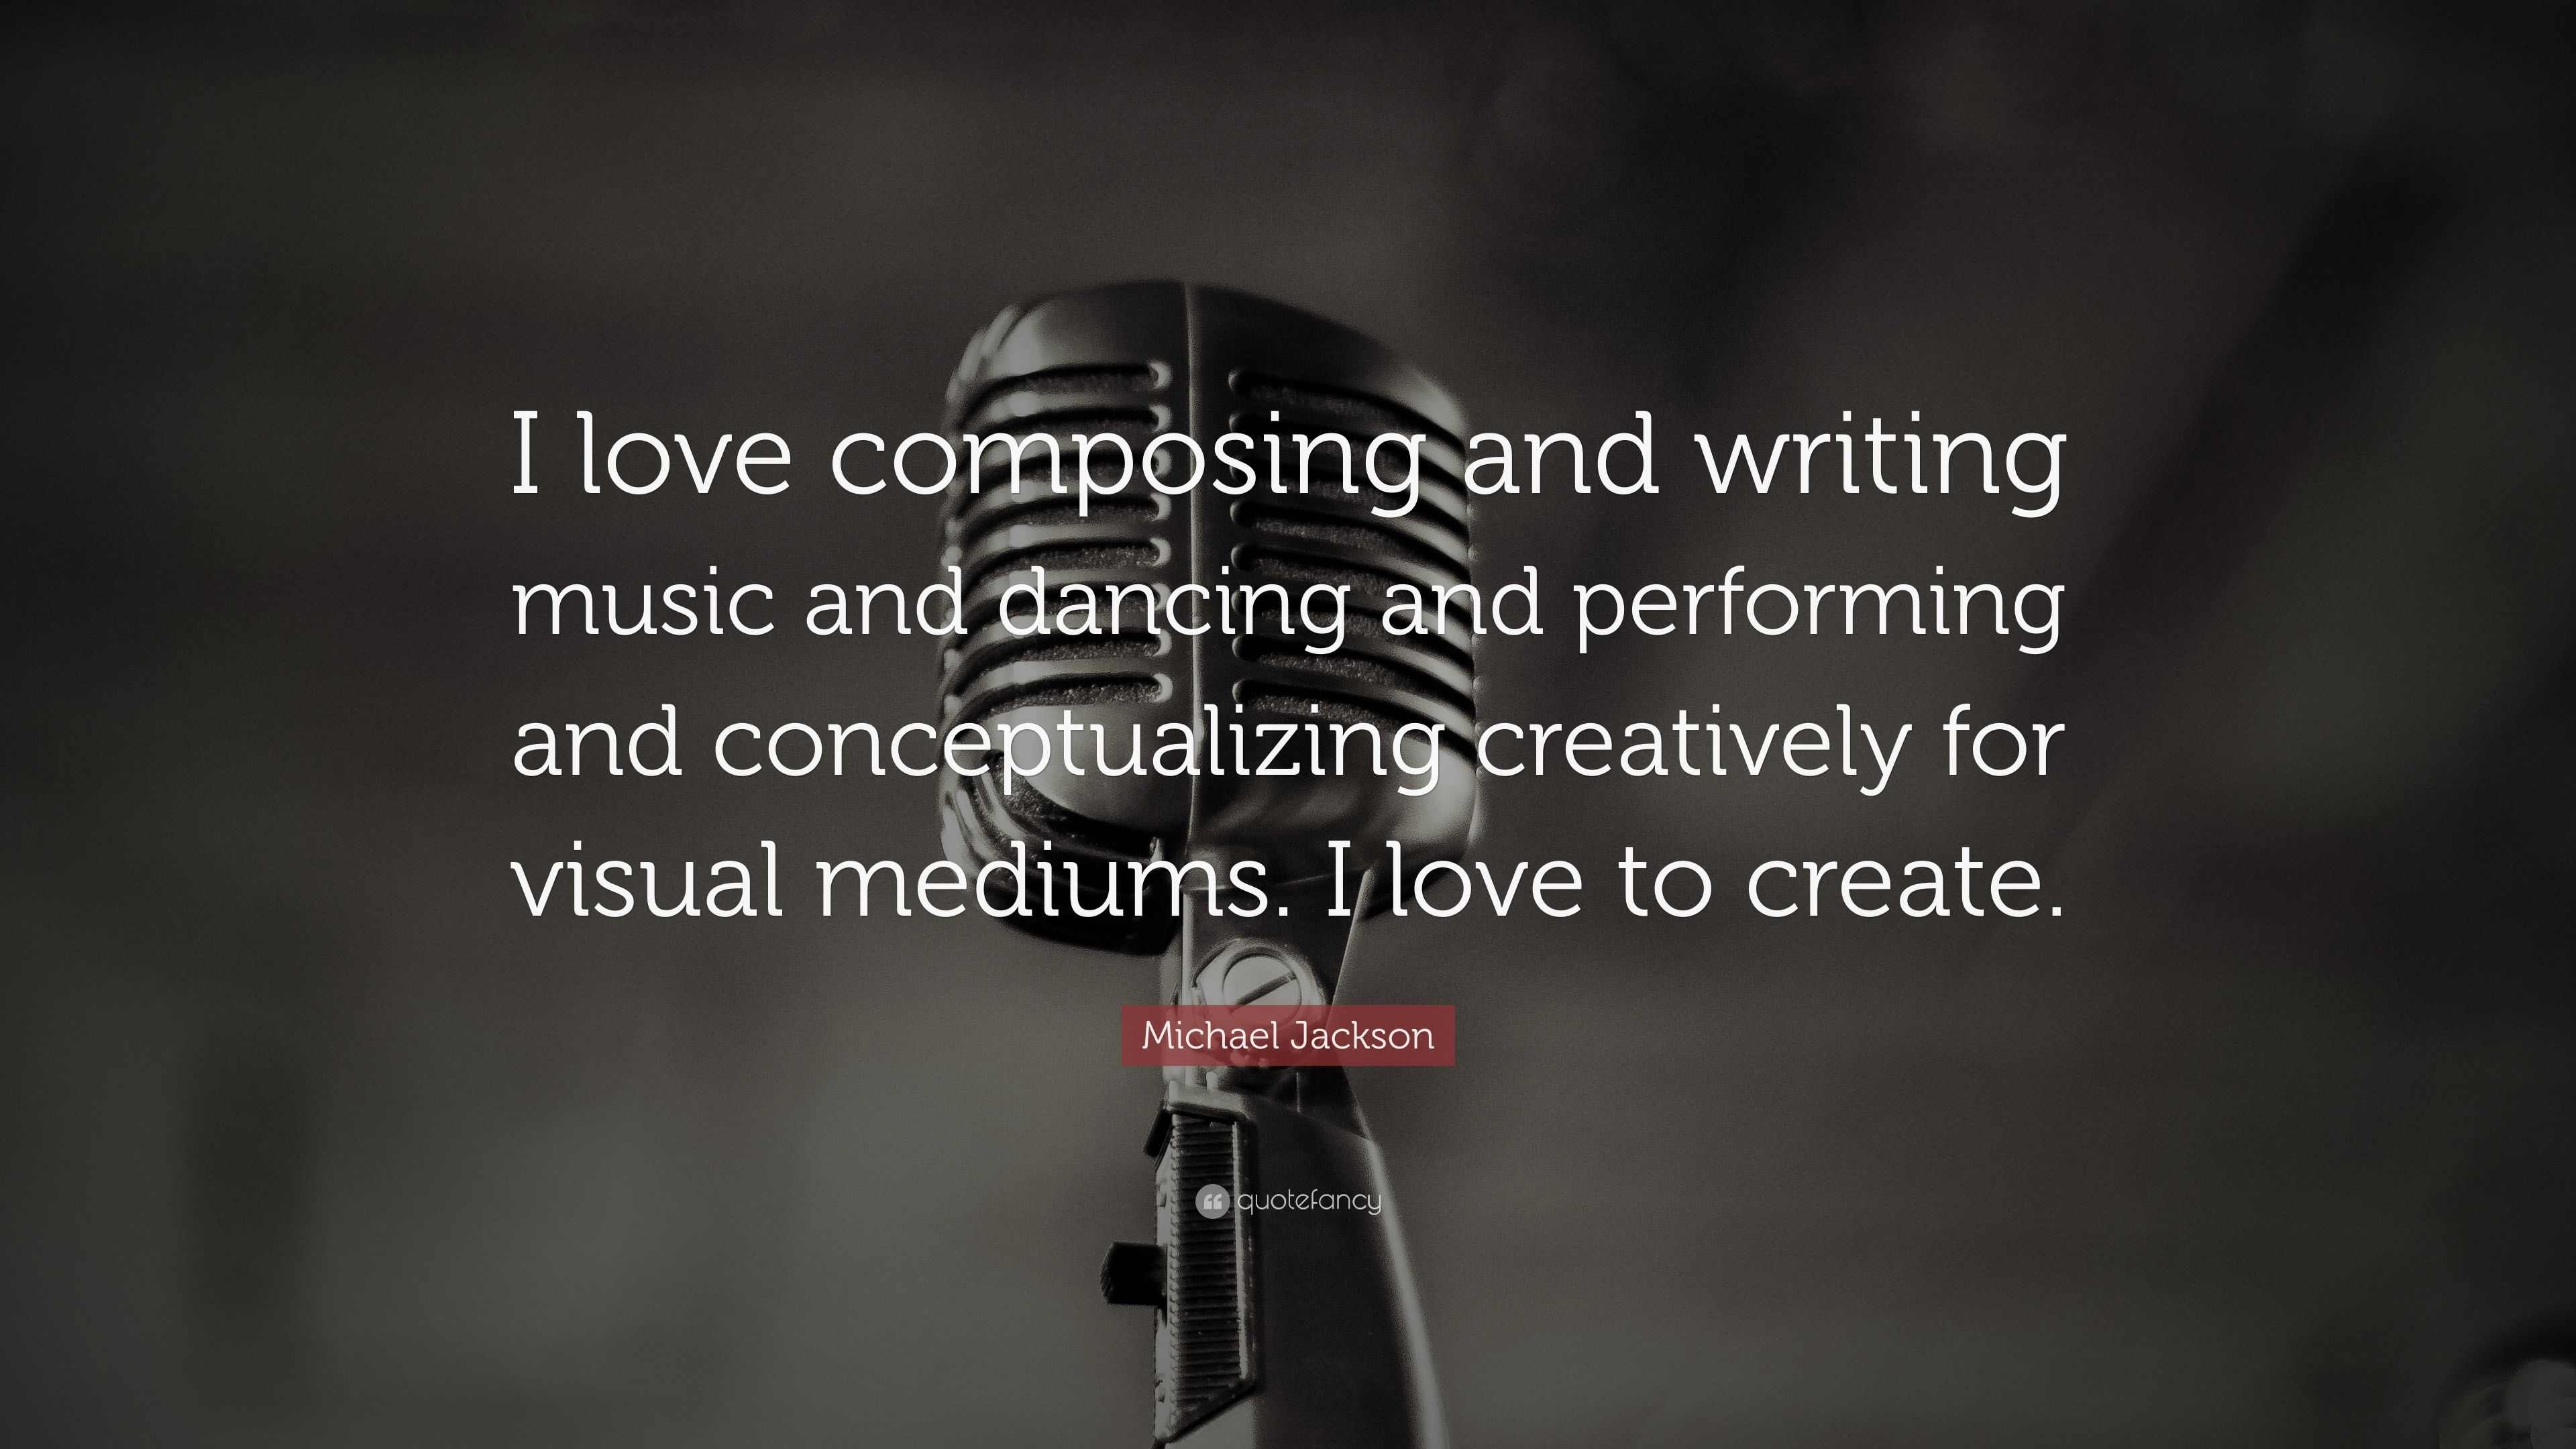 Michael Jackson Quote: “I love composing and writing music